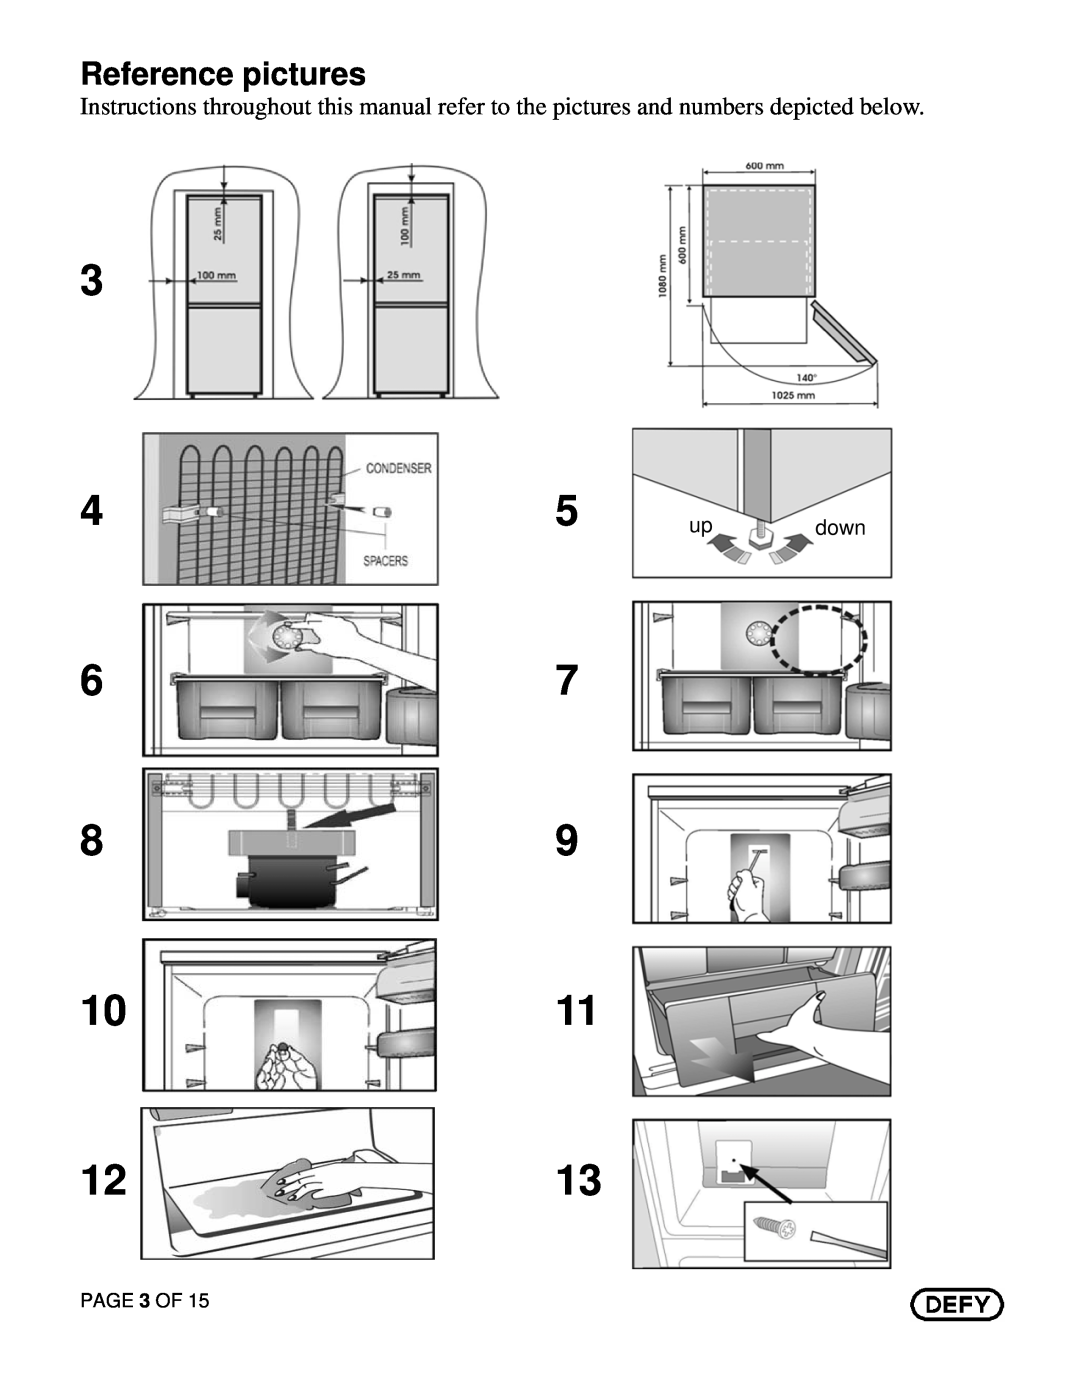 Defy Appliances C375 owner manual Reference pictures, 1011, up down, PAGE 3 OF 